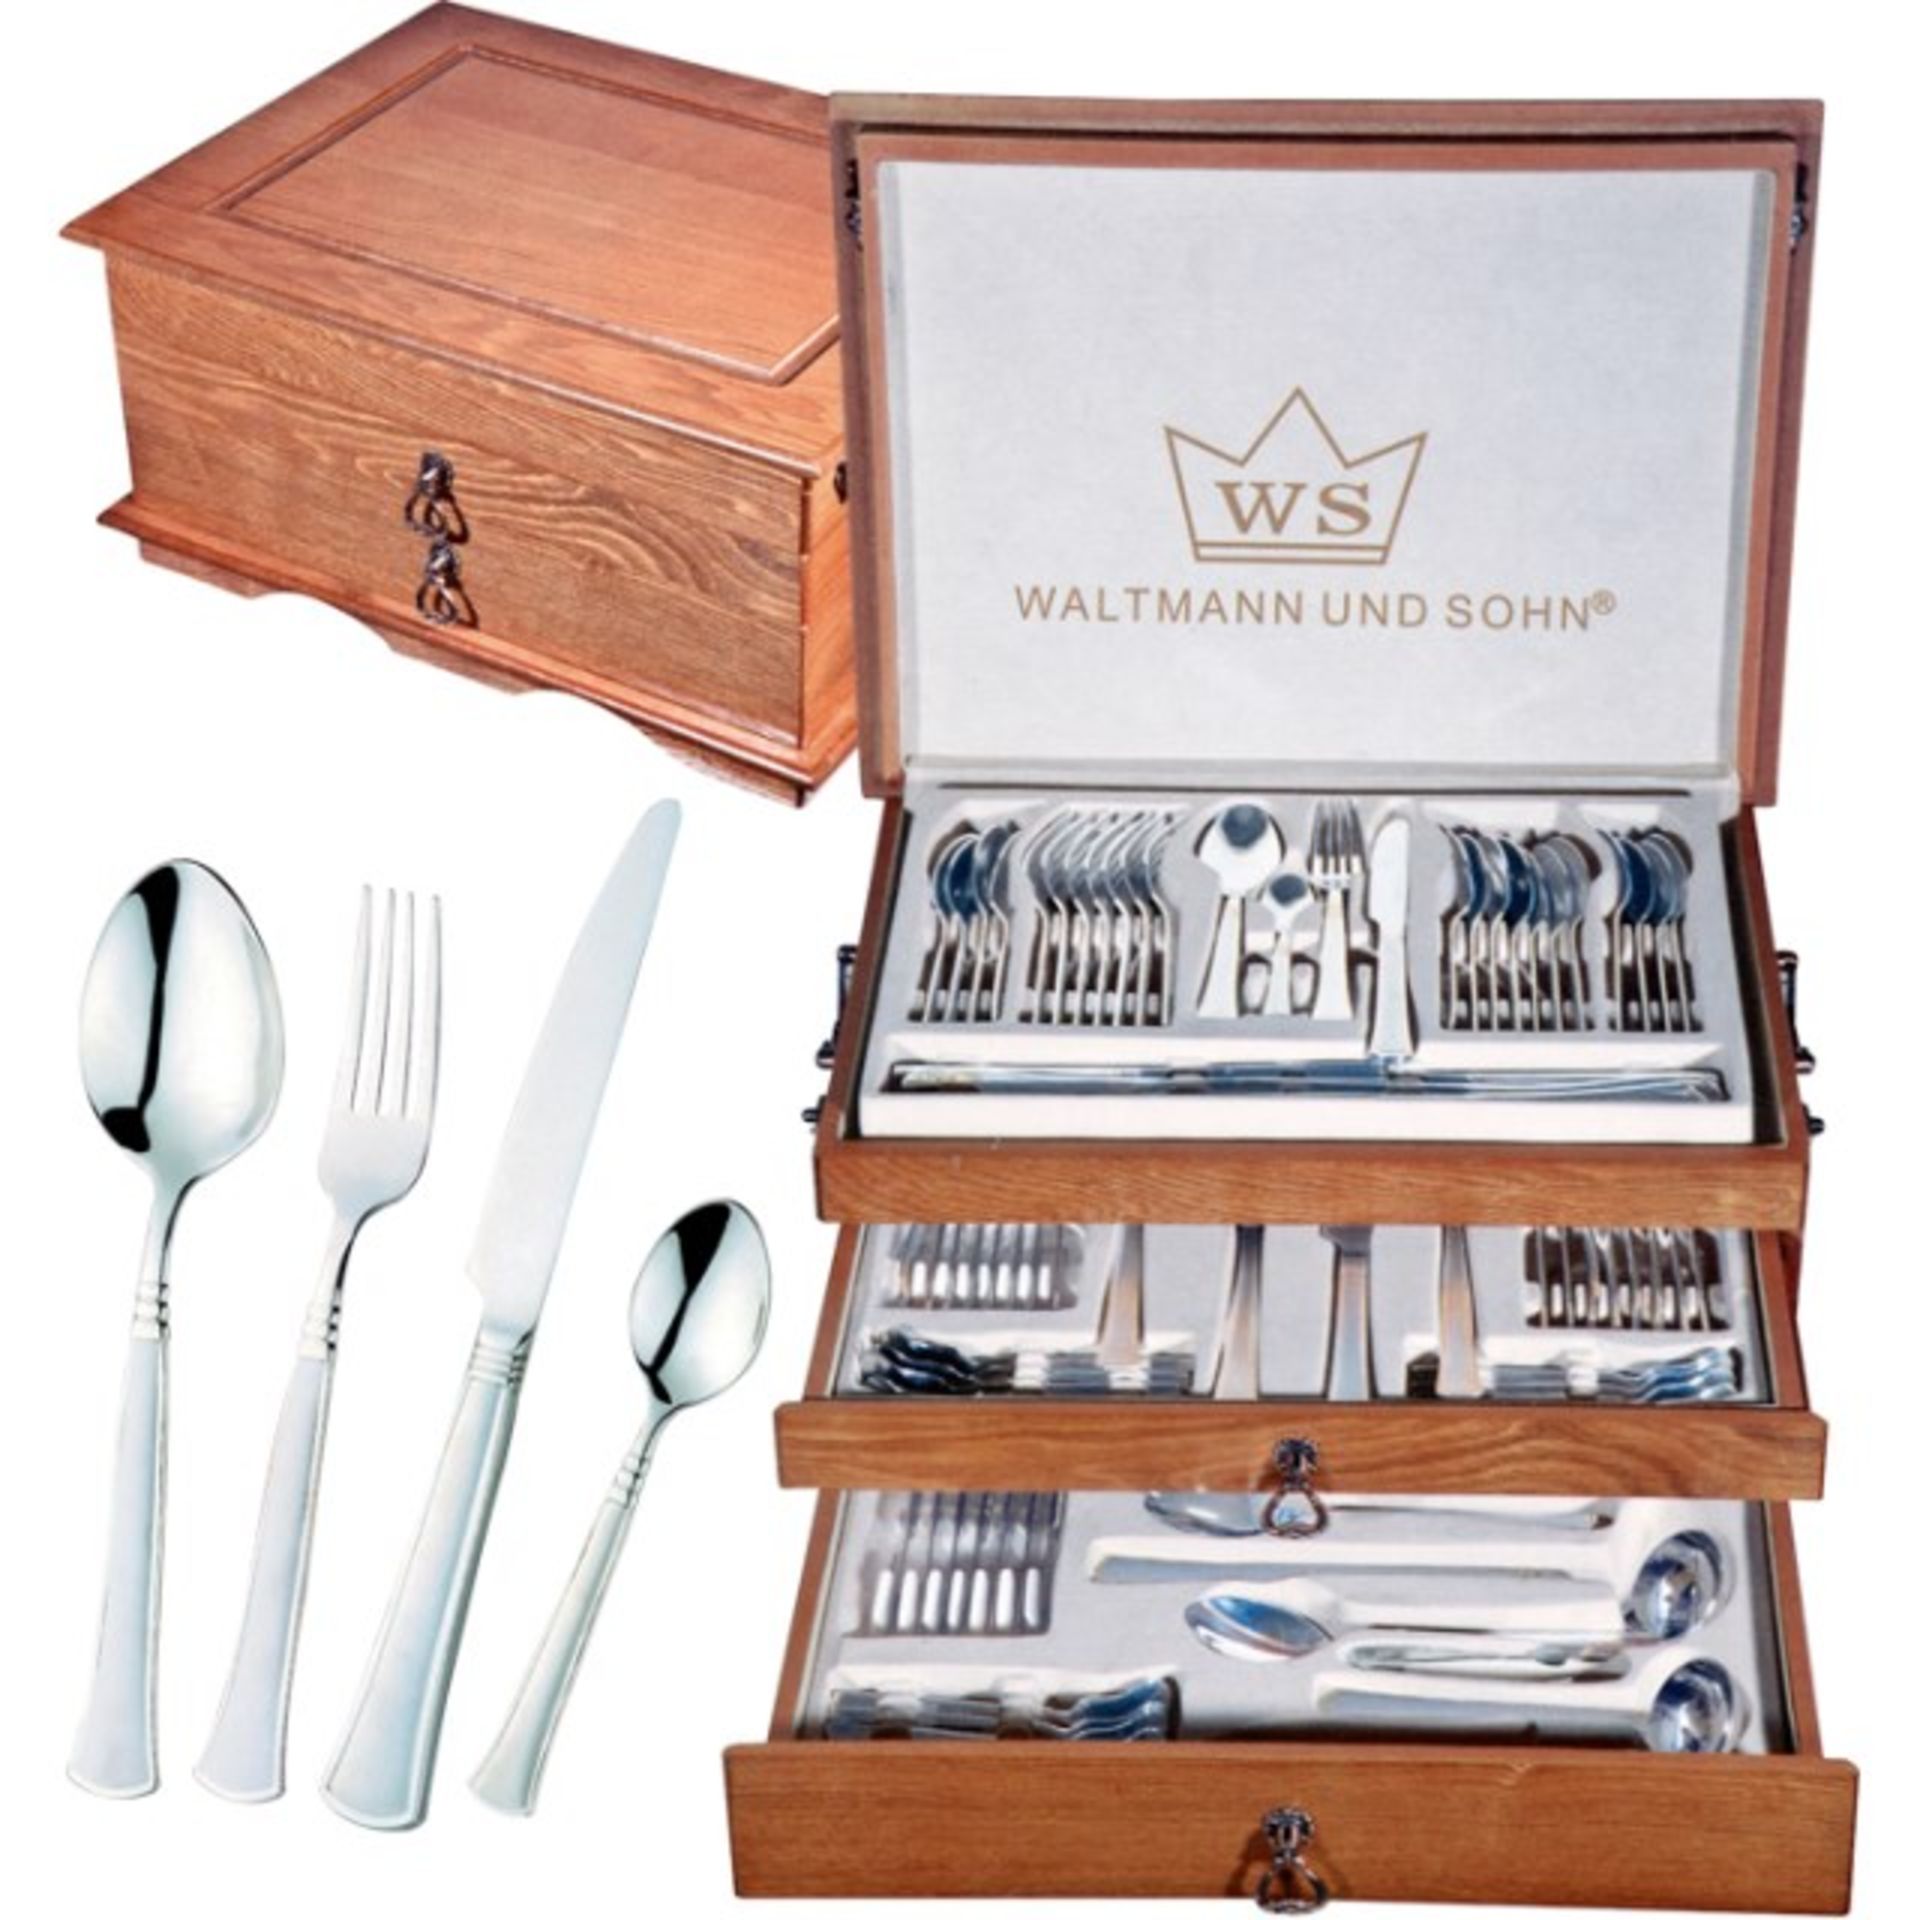 V Brand New Canteen of Cutlery set in wooden case with two drawers containing 87 pcs of Polished